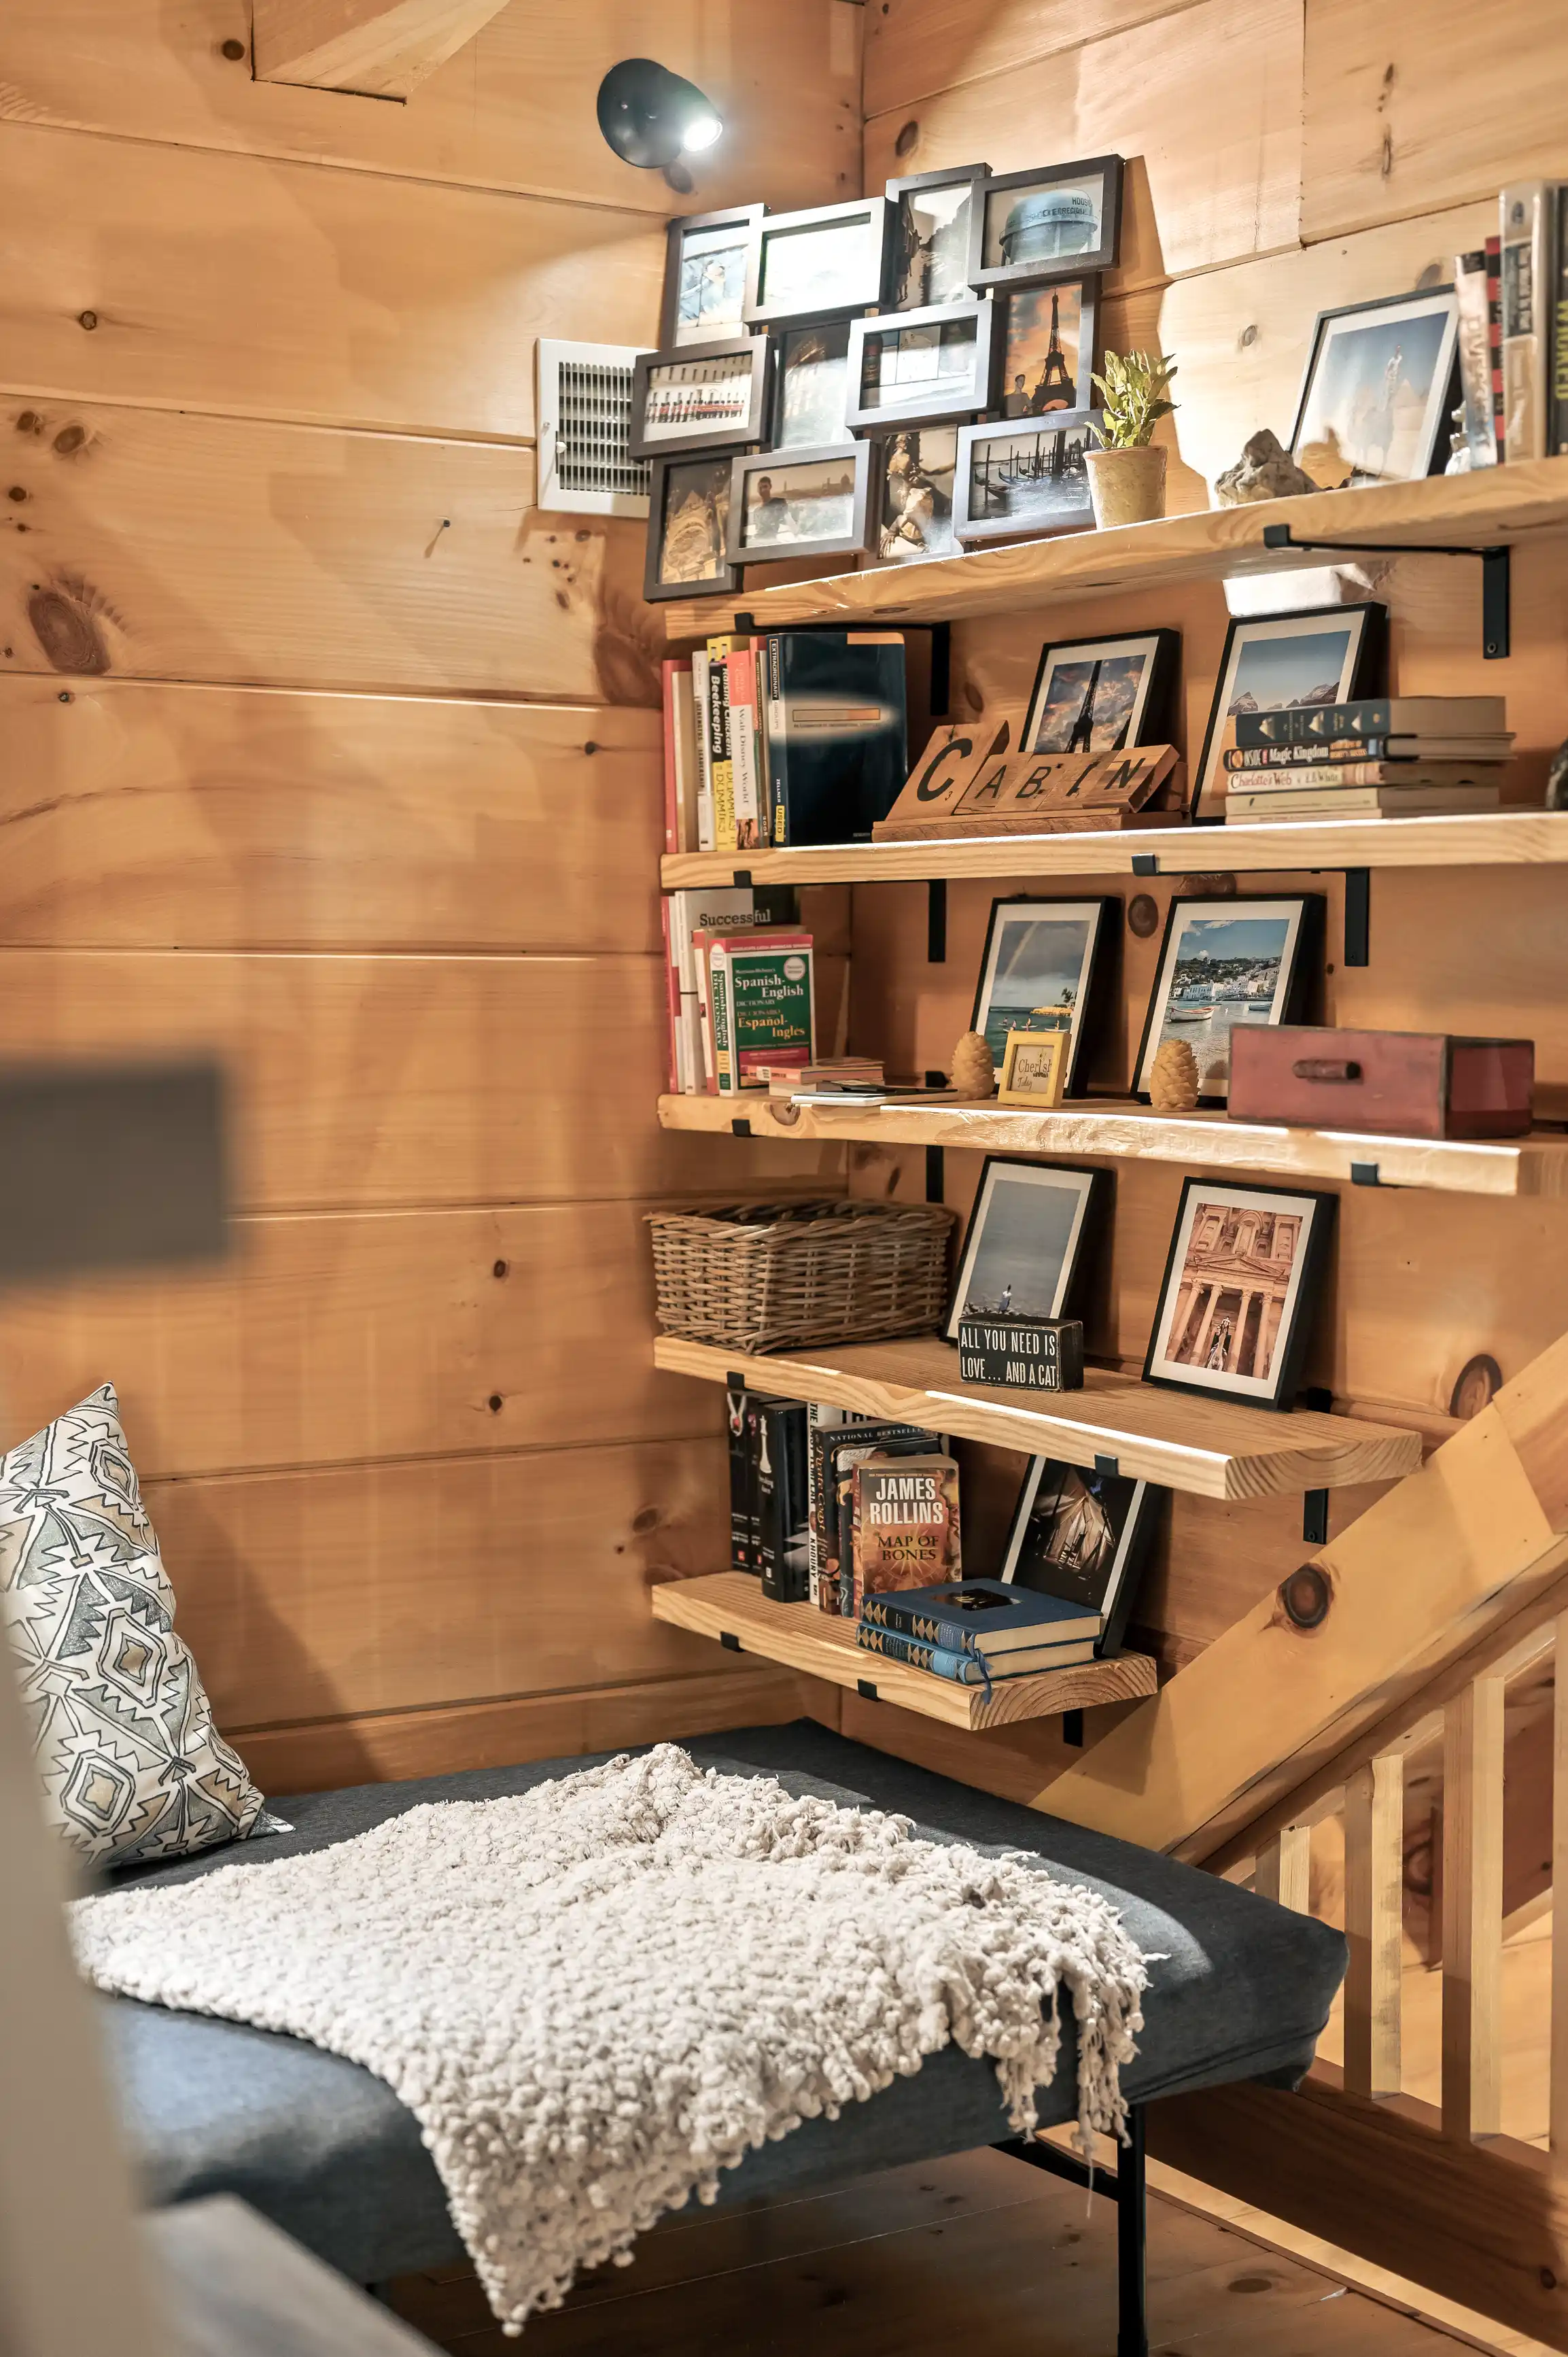 A cozy corner with a bench and a white cushion, adjacent to wooden shelves filled with books, framed pictures, and decorative items, with warm lighting in a cabin interior.